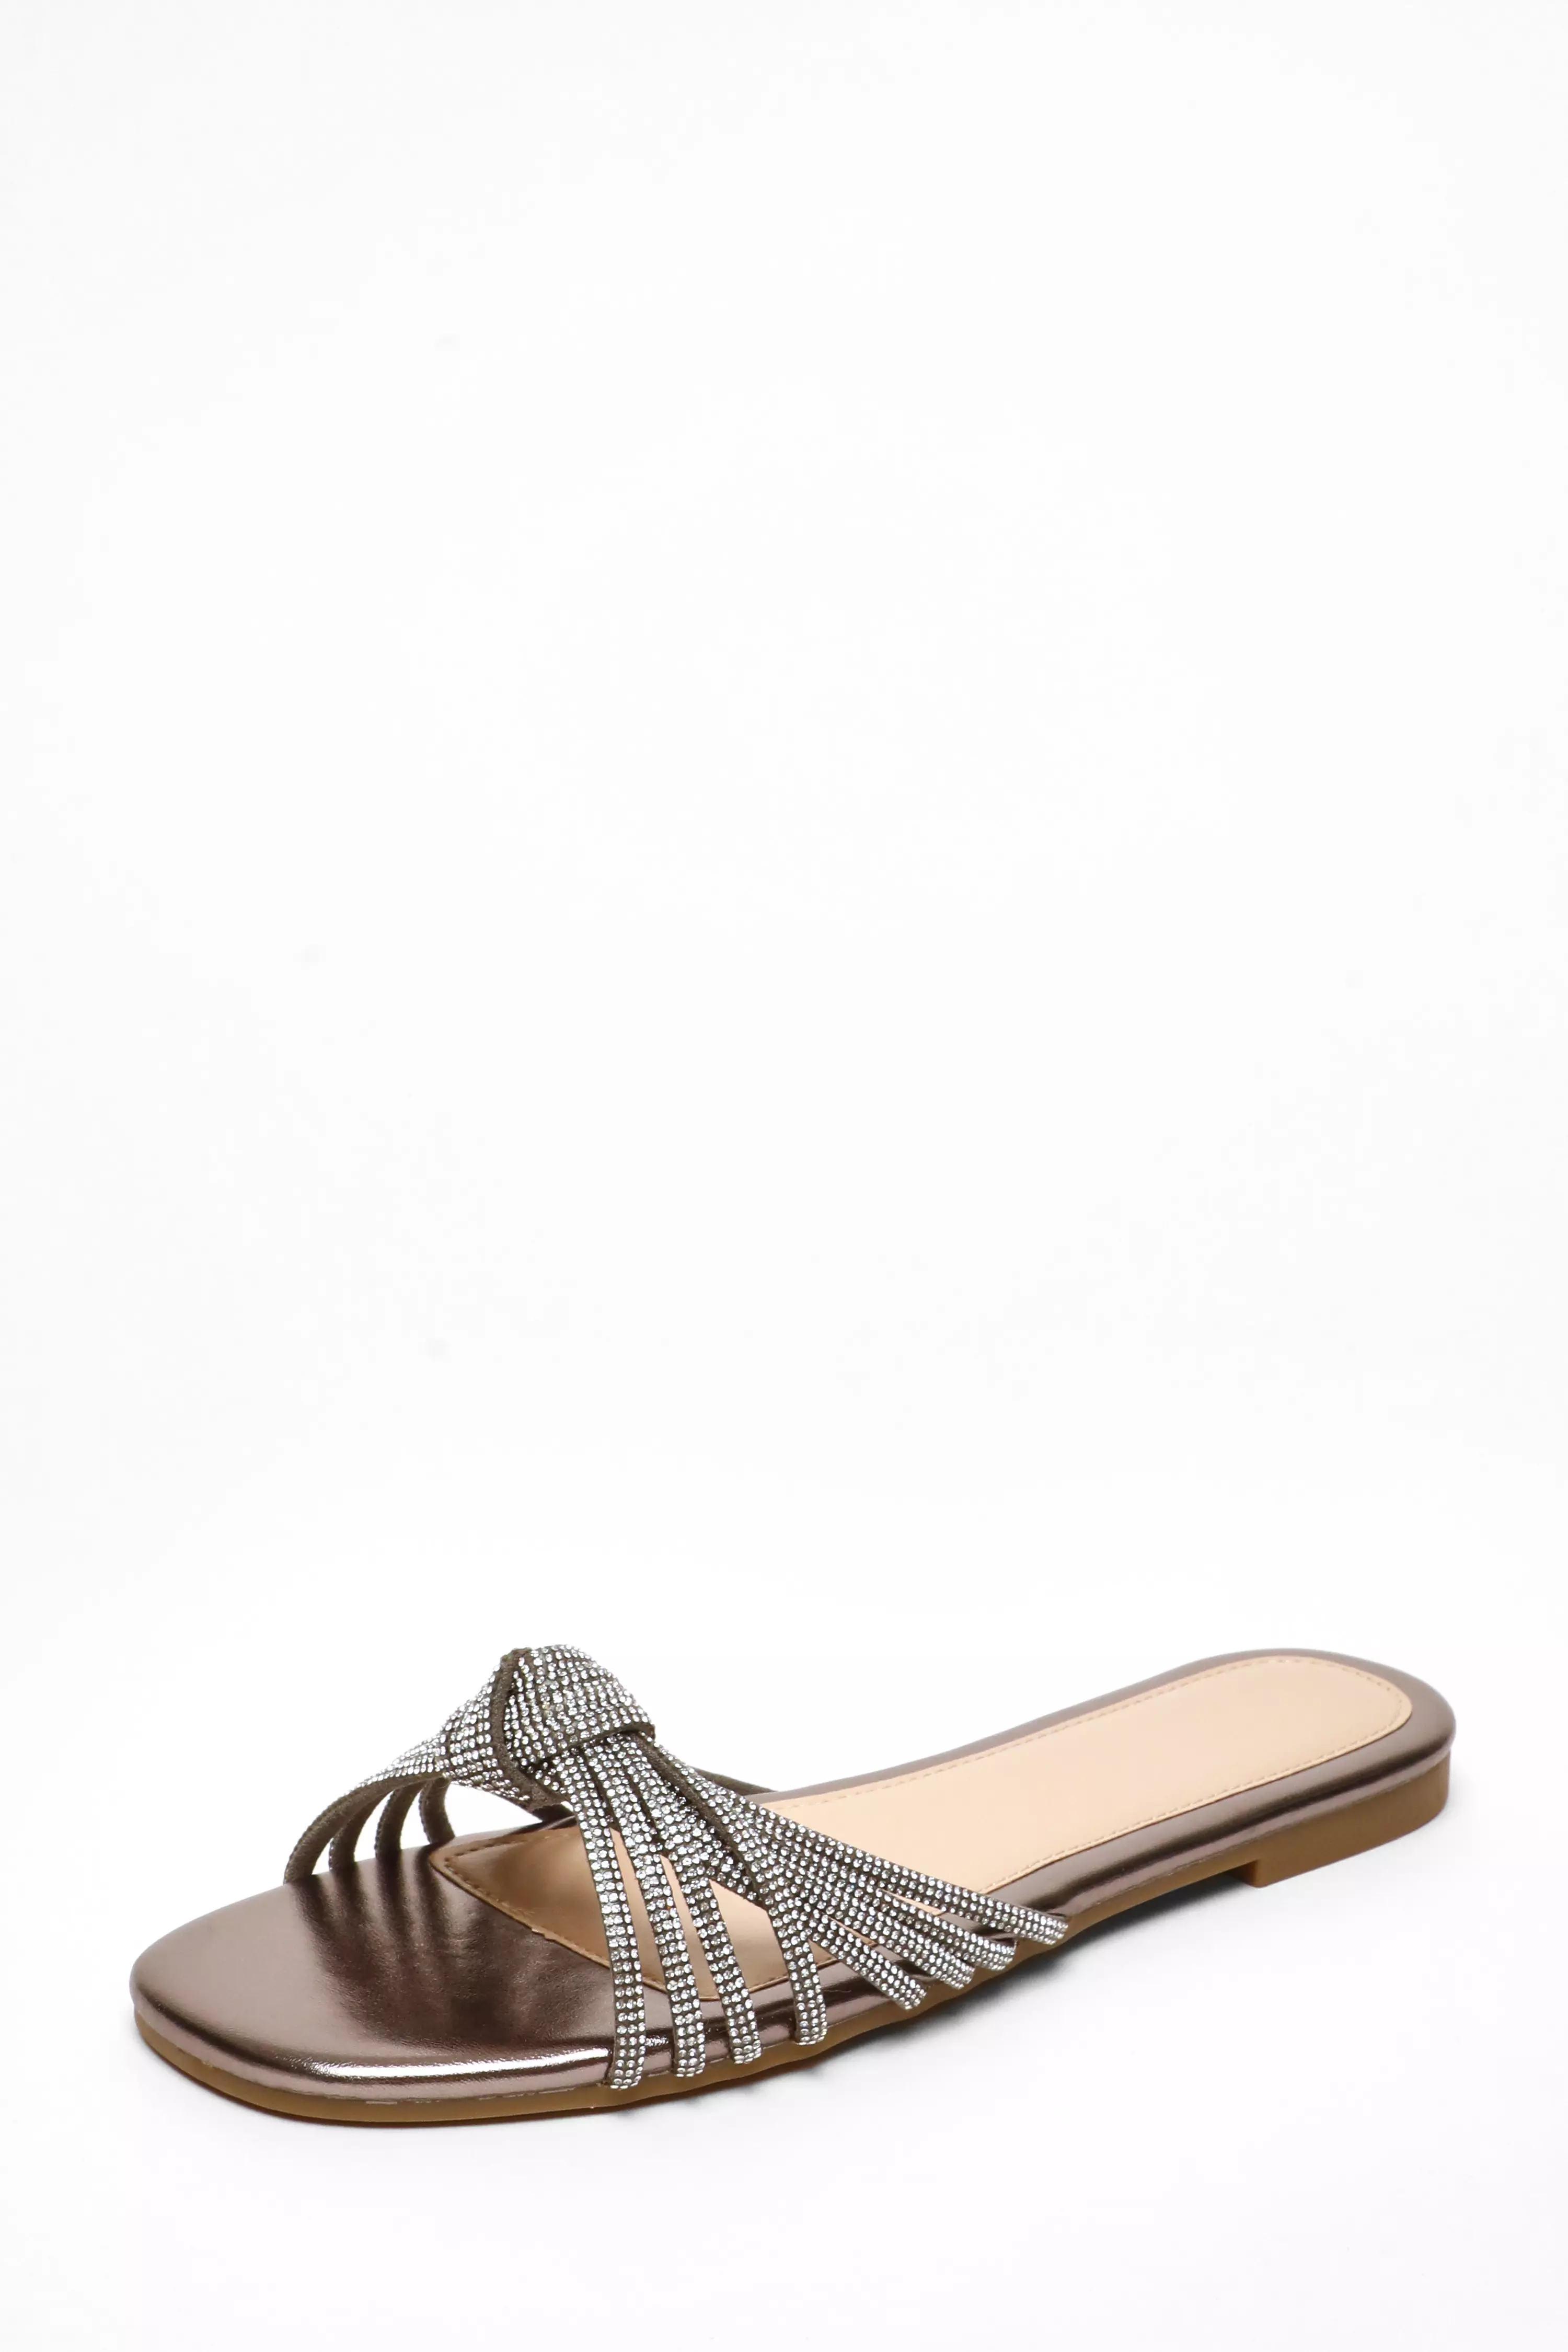 Silver Strappy Knot Diamante Flat Sandals